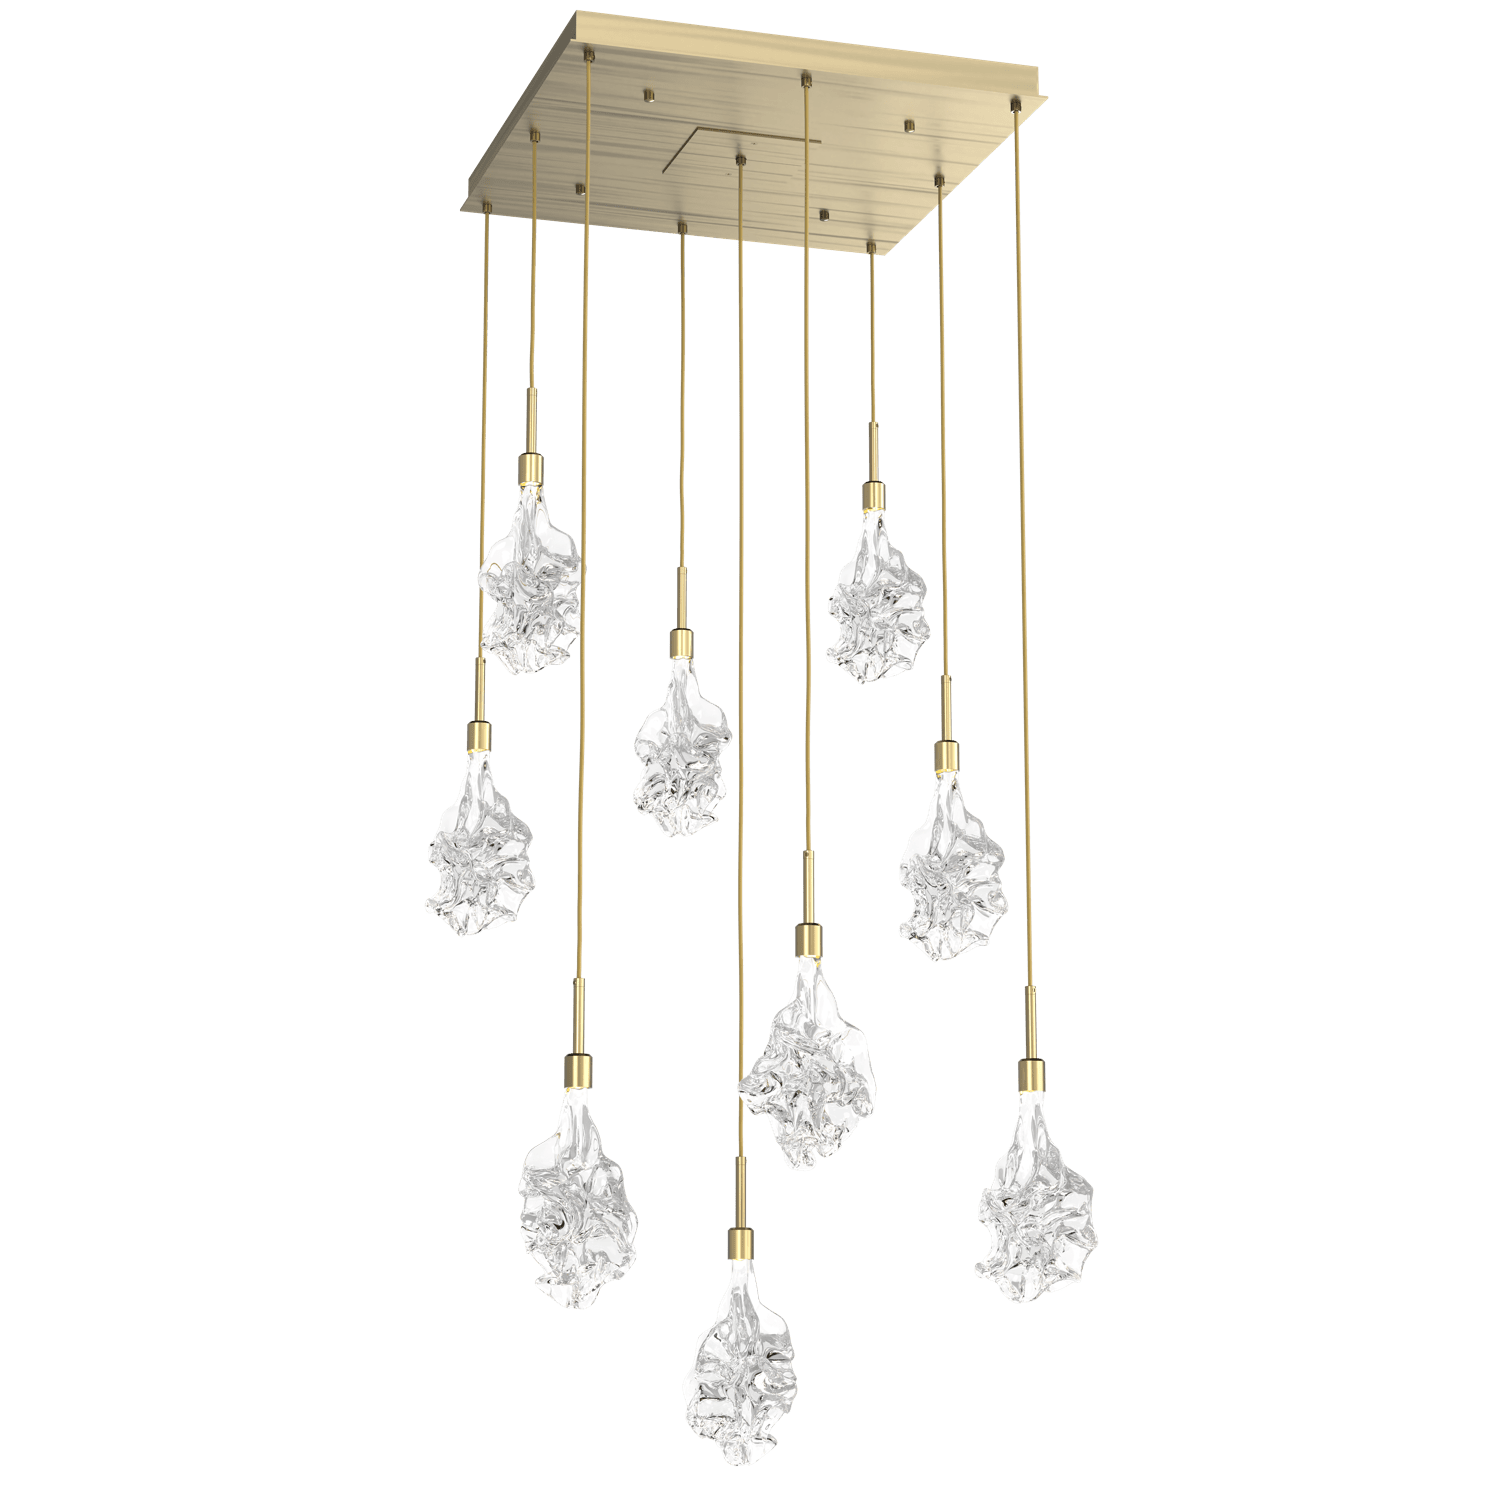 CHB0059-09-HB-Hammerton-Studio-Blossom-9-light-square-pendant-chandelier-with-heritage-brass-finish-and-clear-handblown-crystal-glass-shades-and-LED-lamping